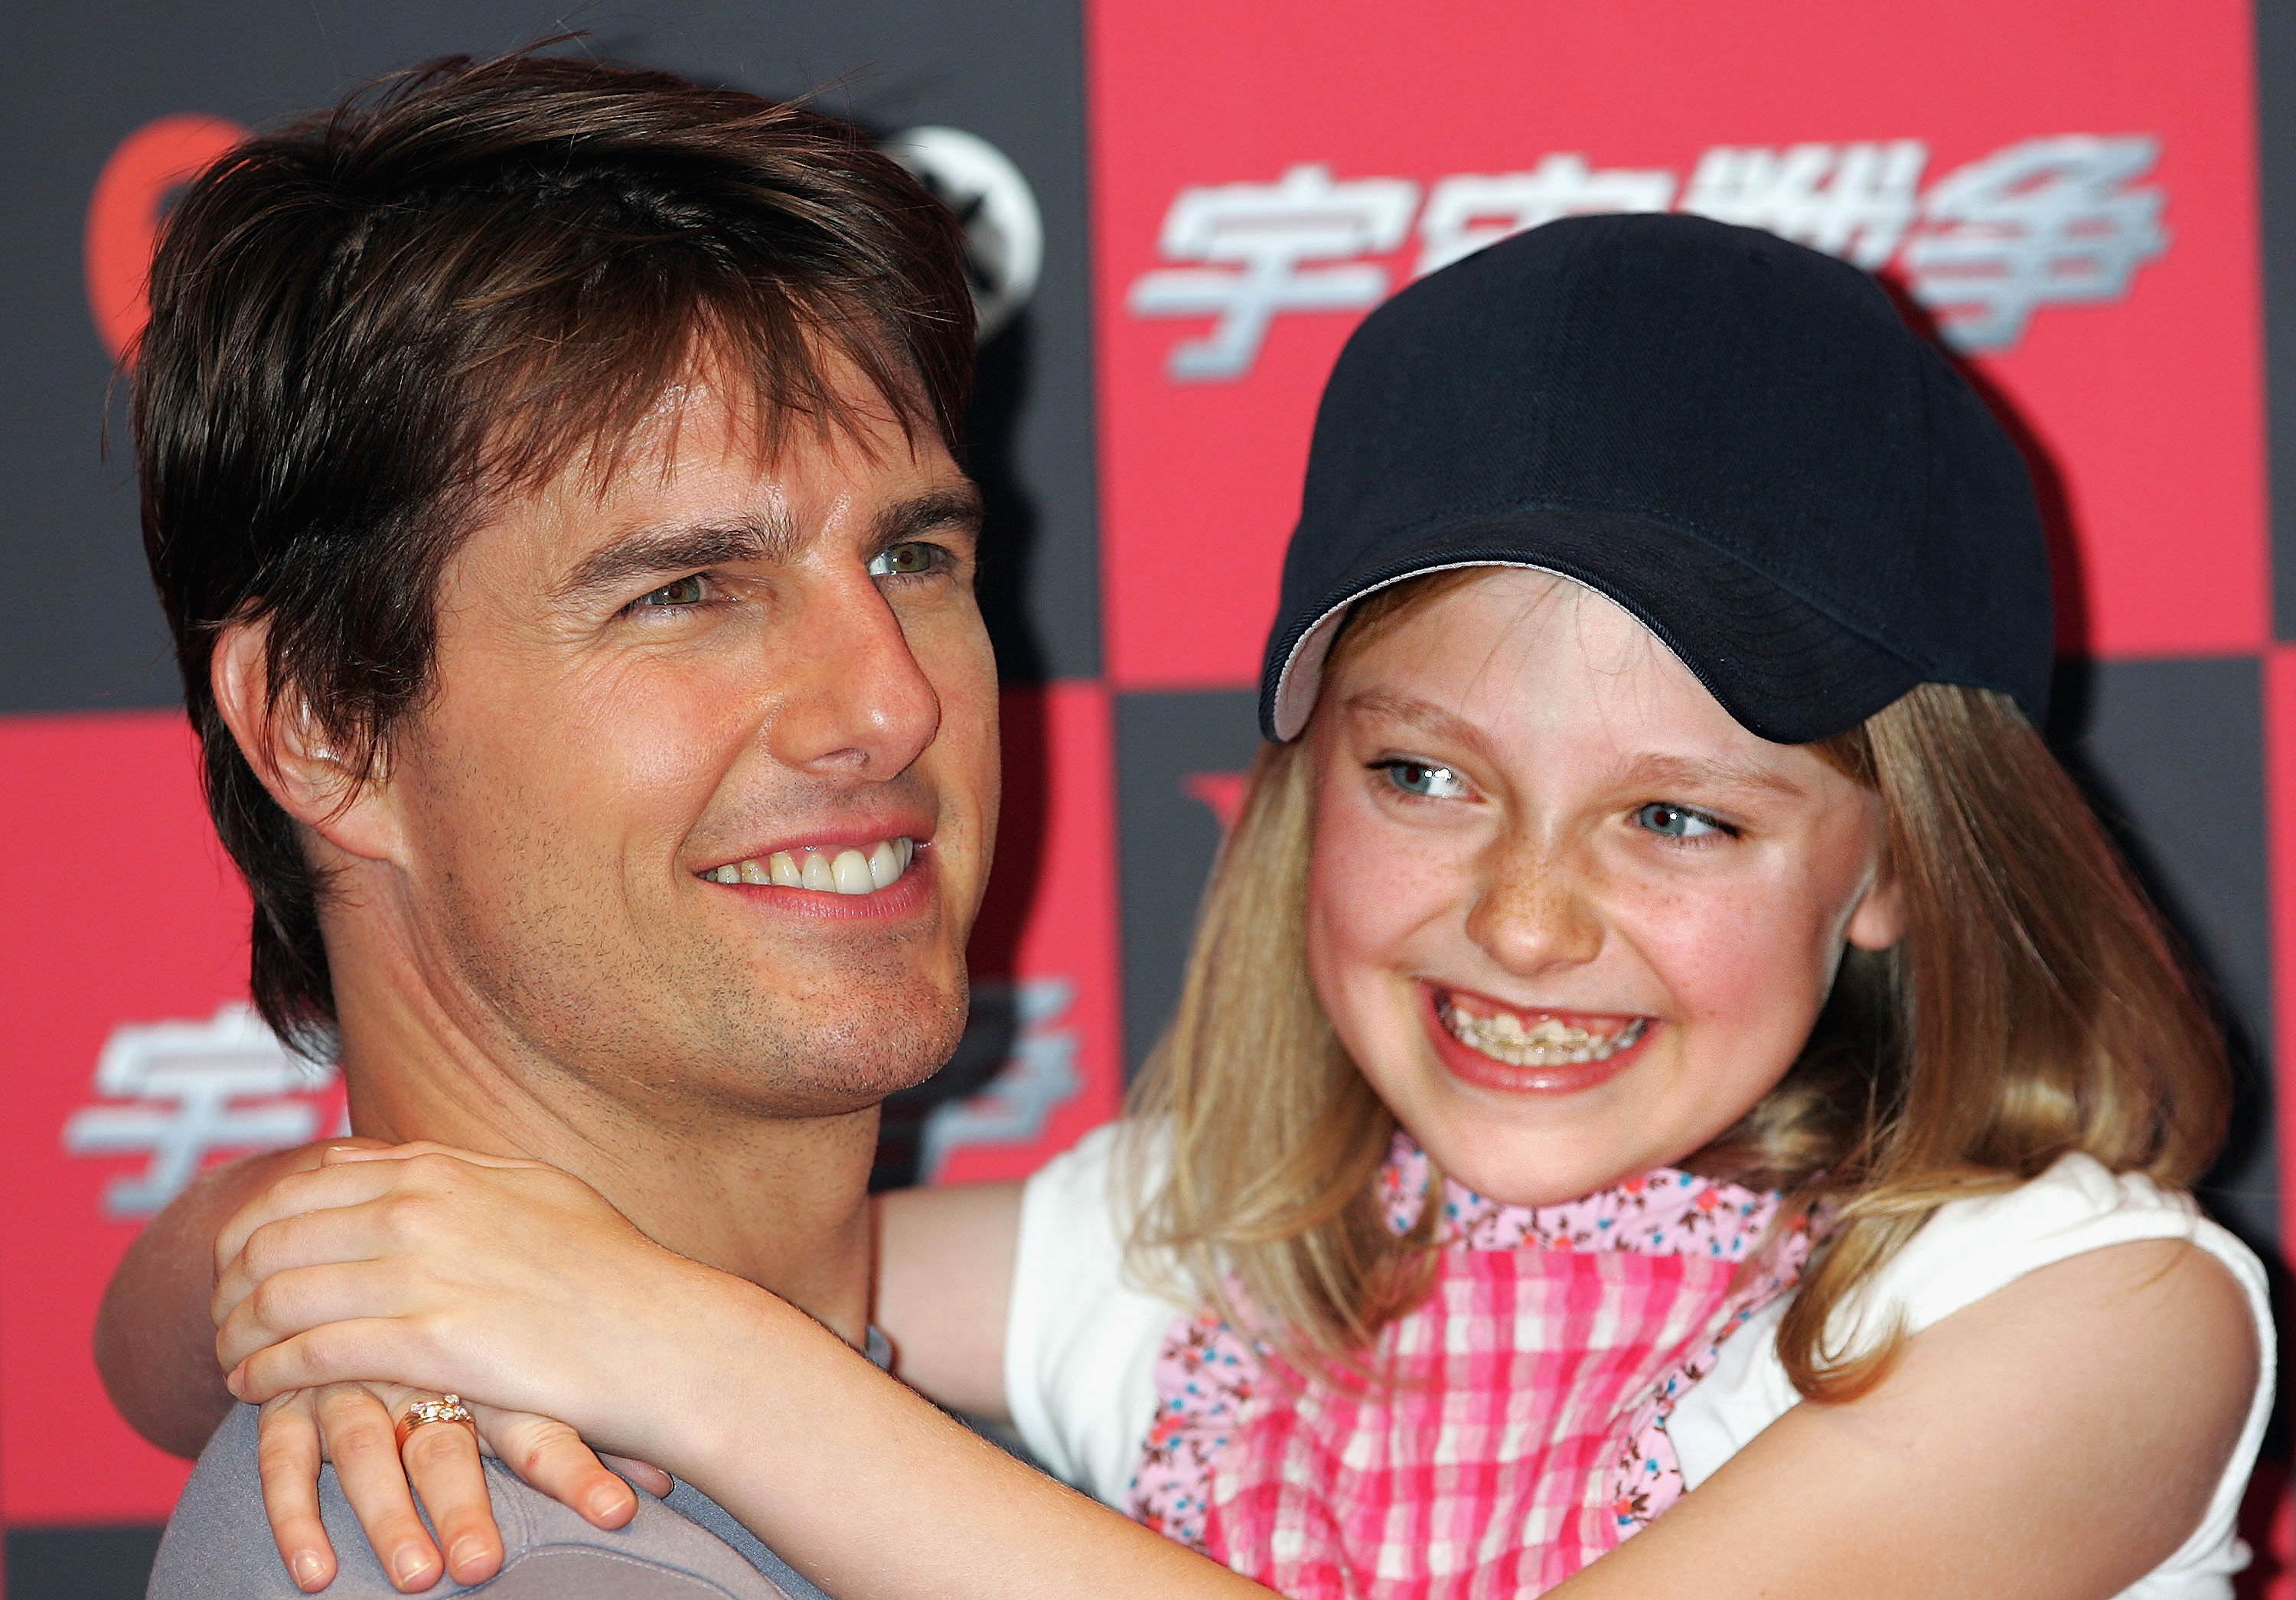 Tom Cruise and Dakota Flanning attend a photo call to promote "War of the Worlds" on June 13, 2005 in Tokyo, Japan | Source: Getty Images